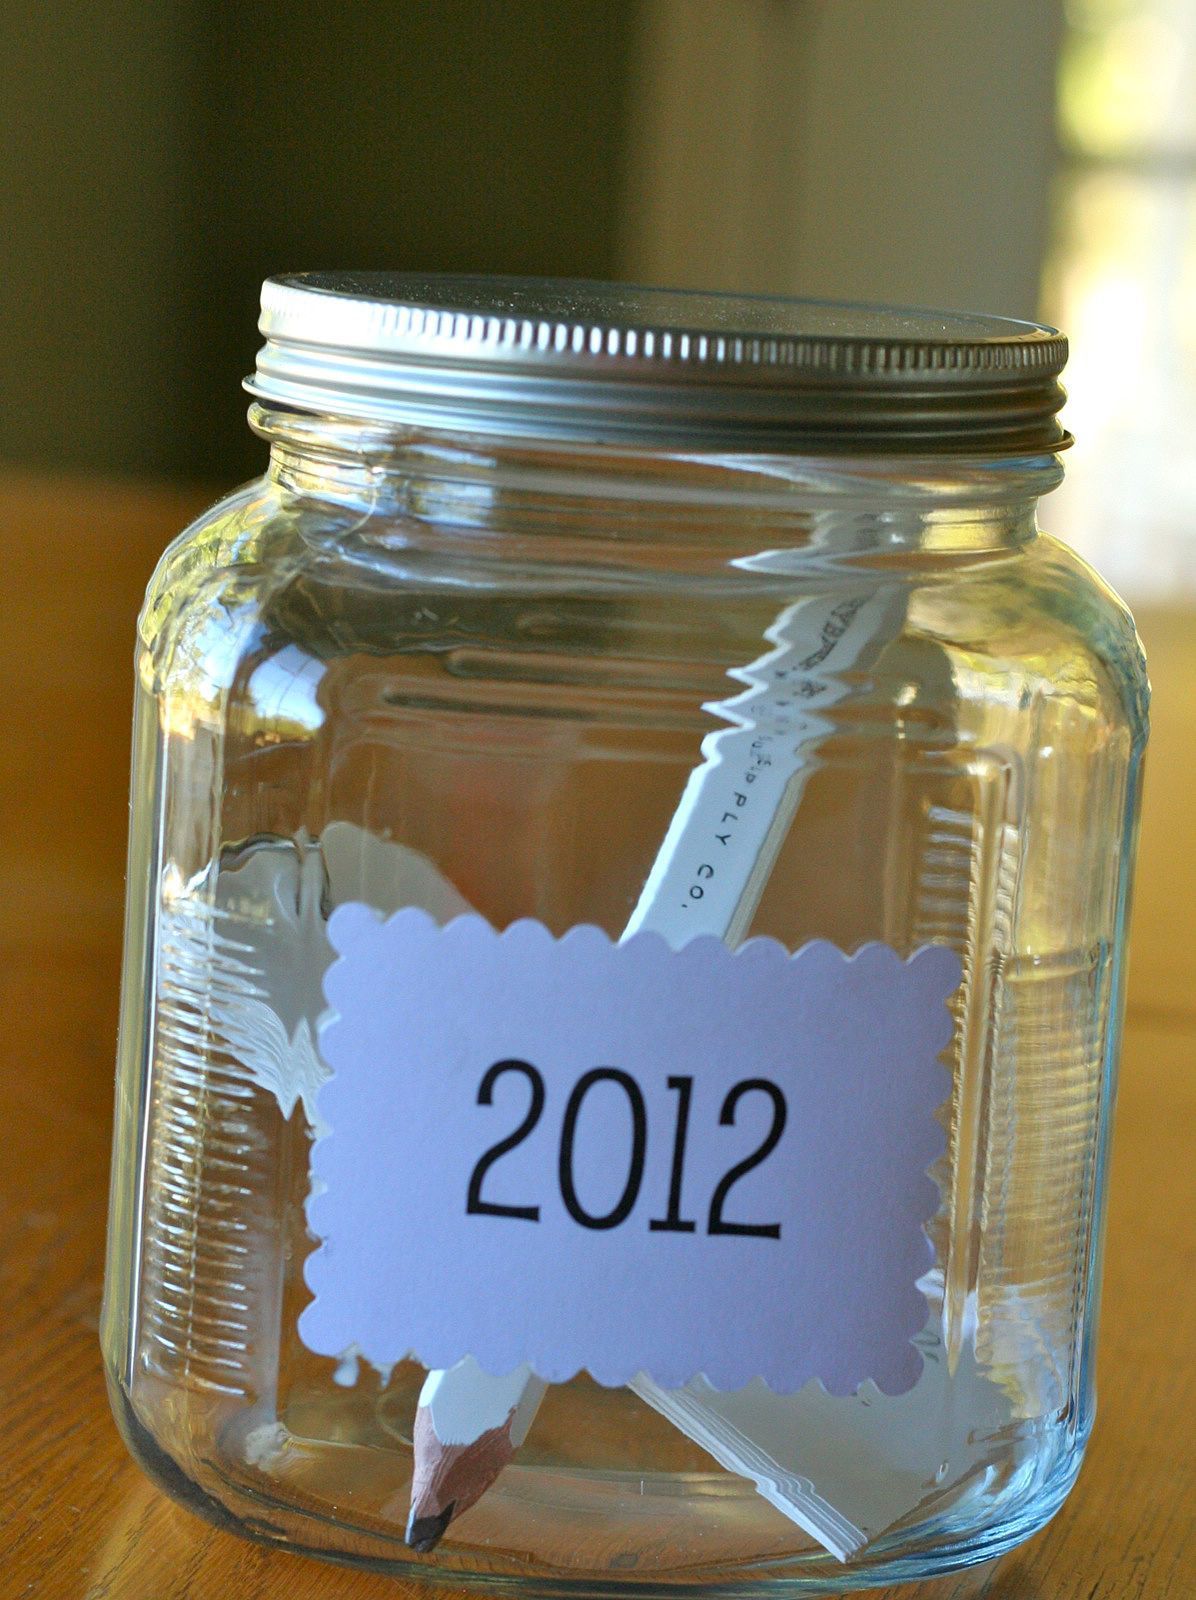 Memory Jar….need to start this in 2013!